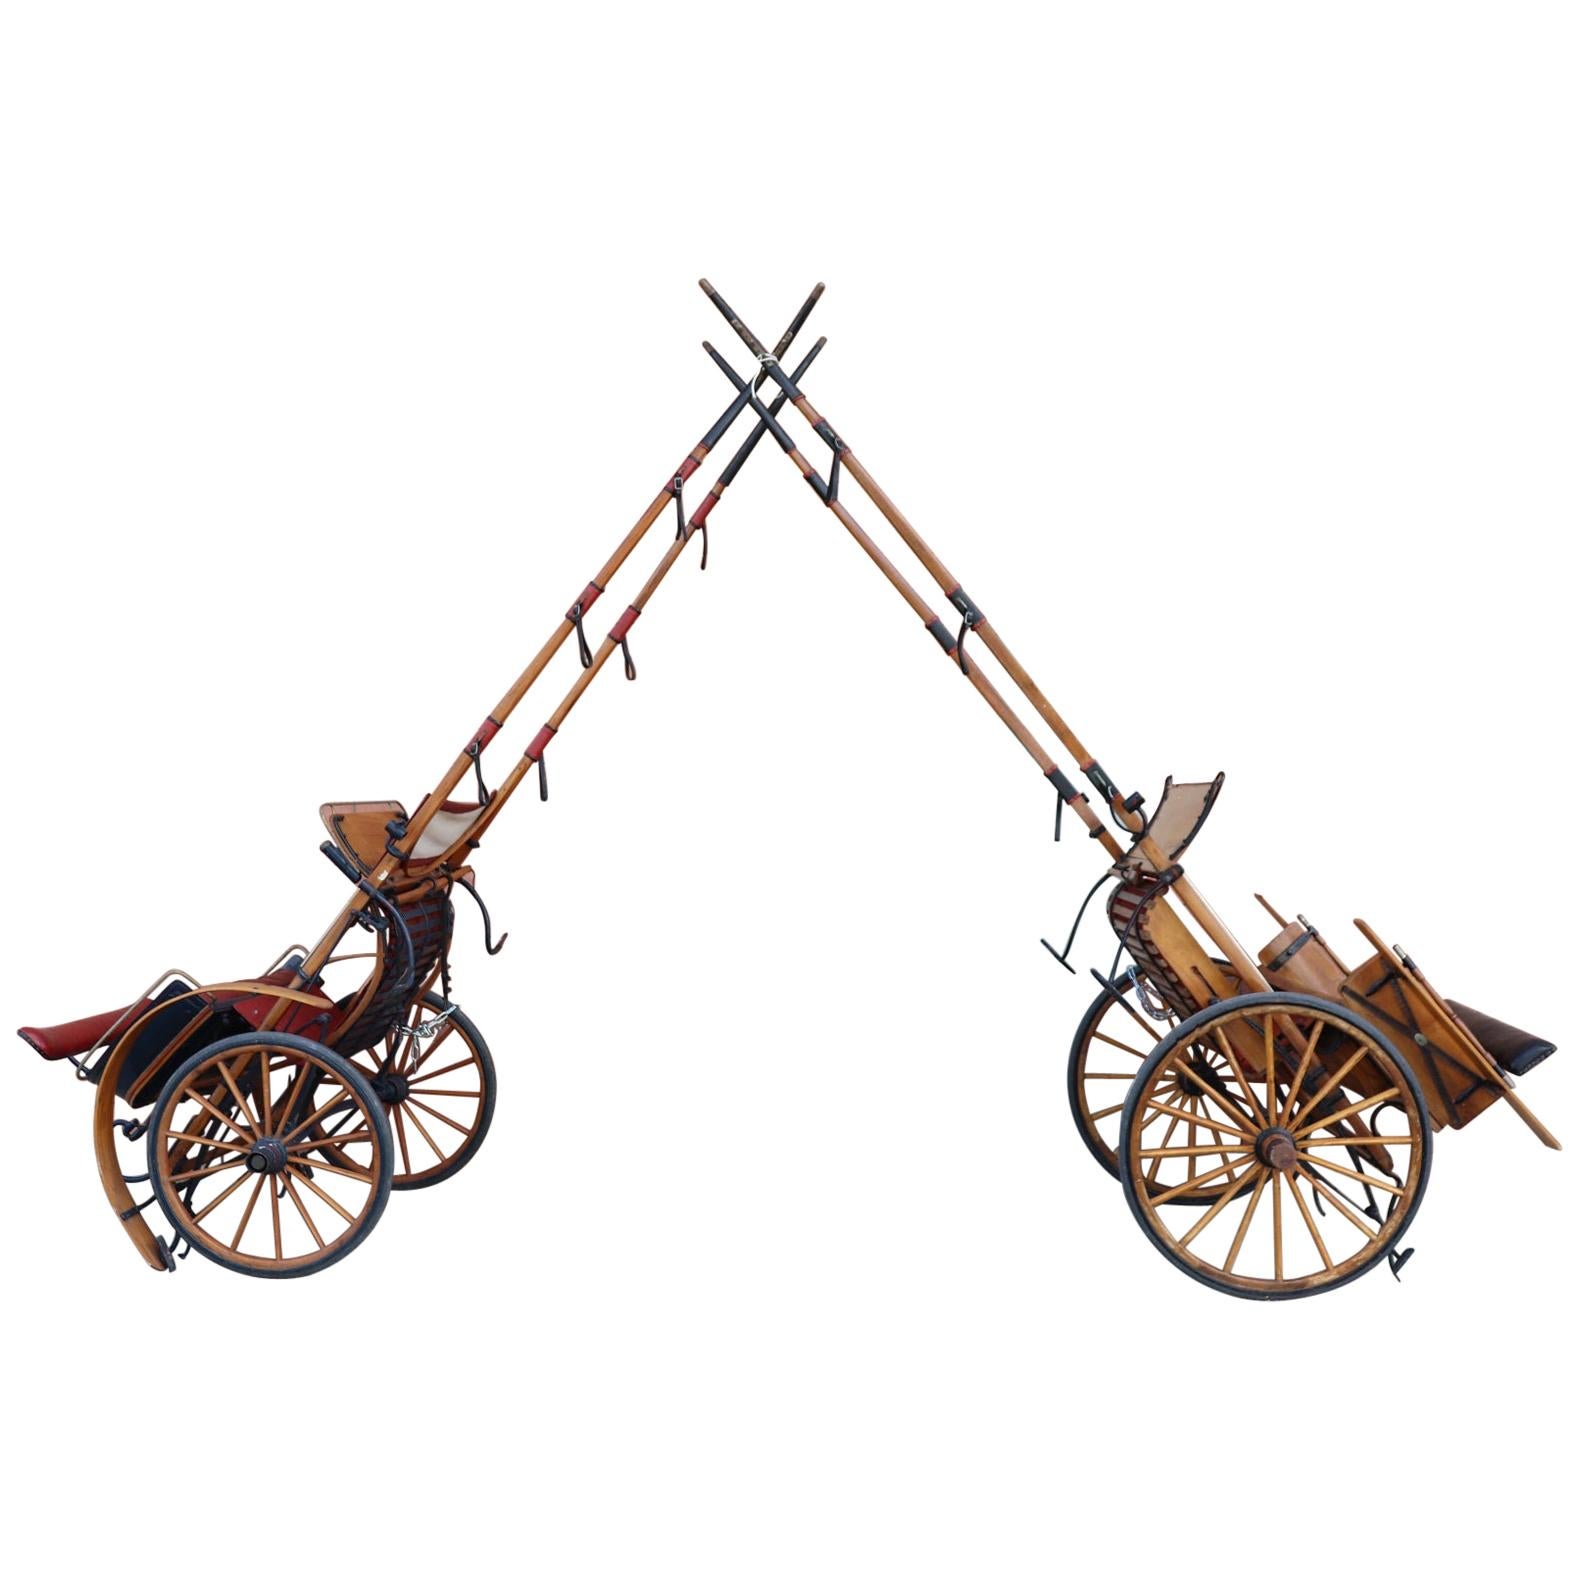 Early 20th Century Italian Pair of Horse Drawn Carriage Buggy Carriage Wagon